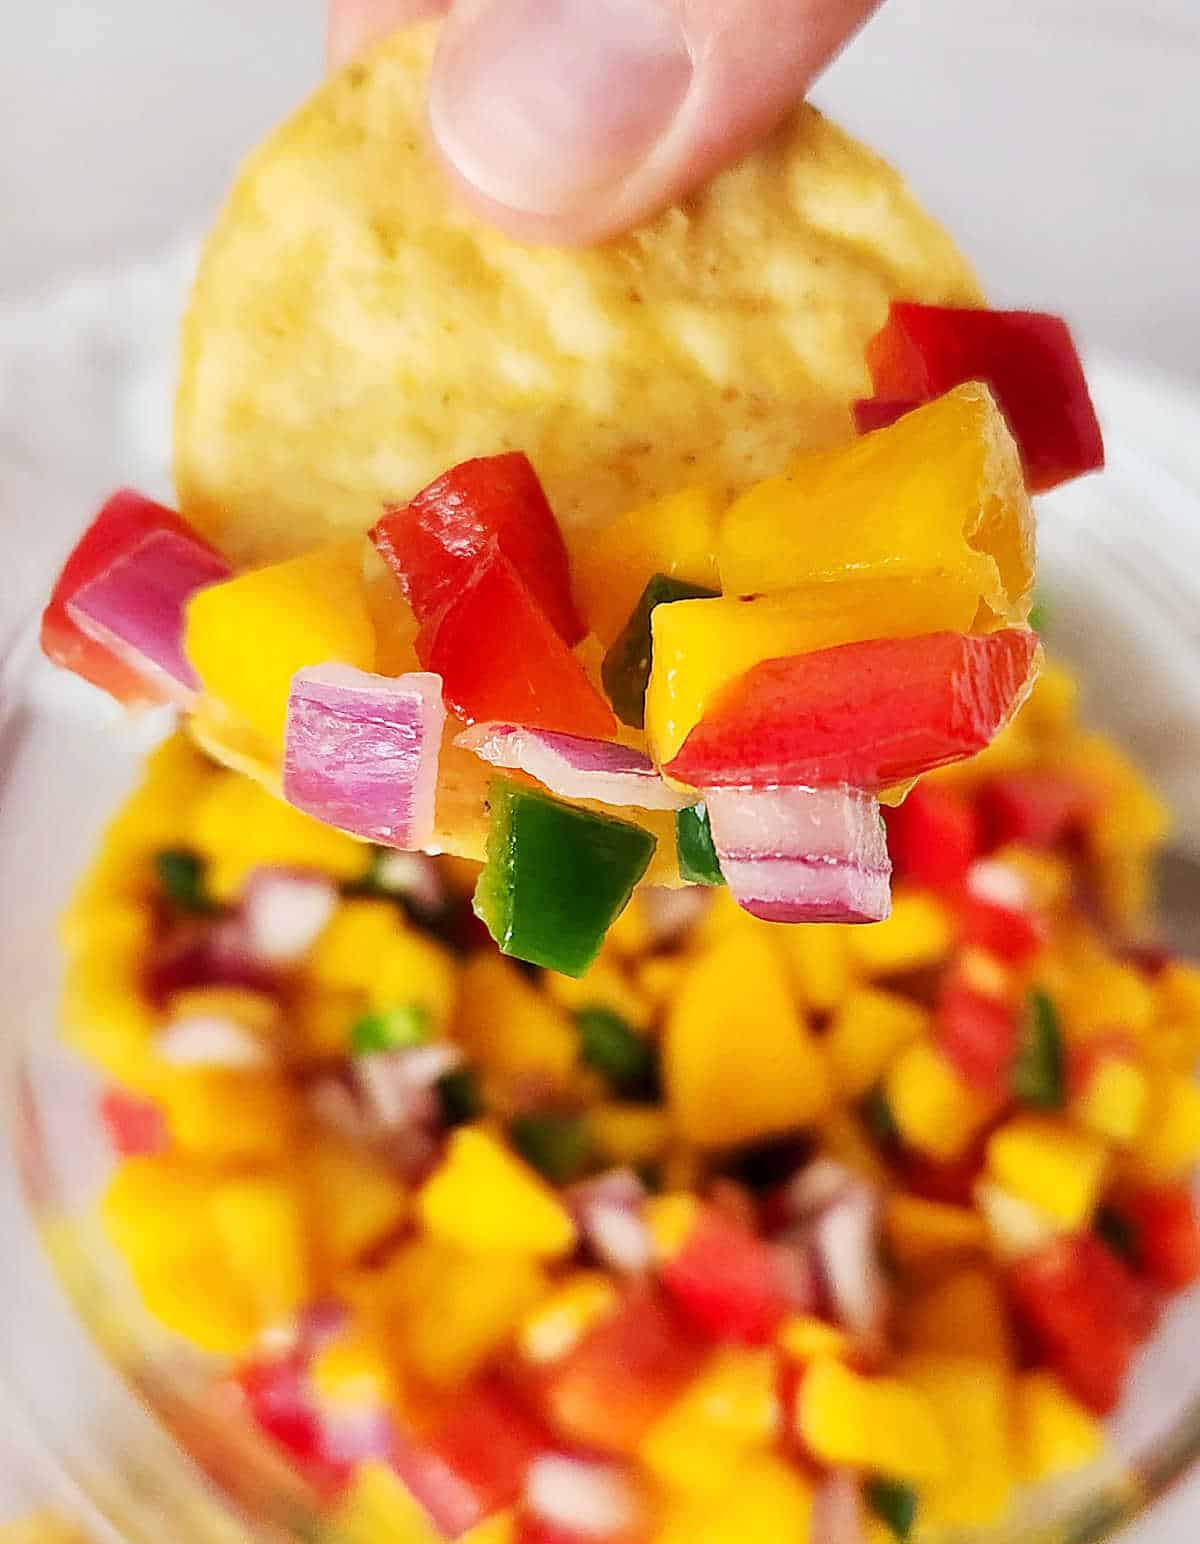 Corn chip with mango peach salsa held over bowl with more salsa.